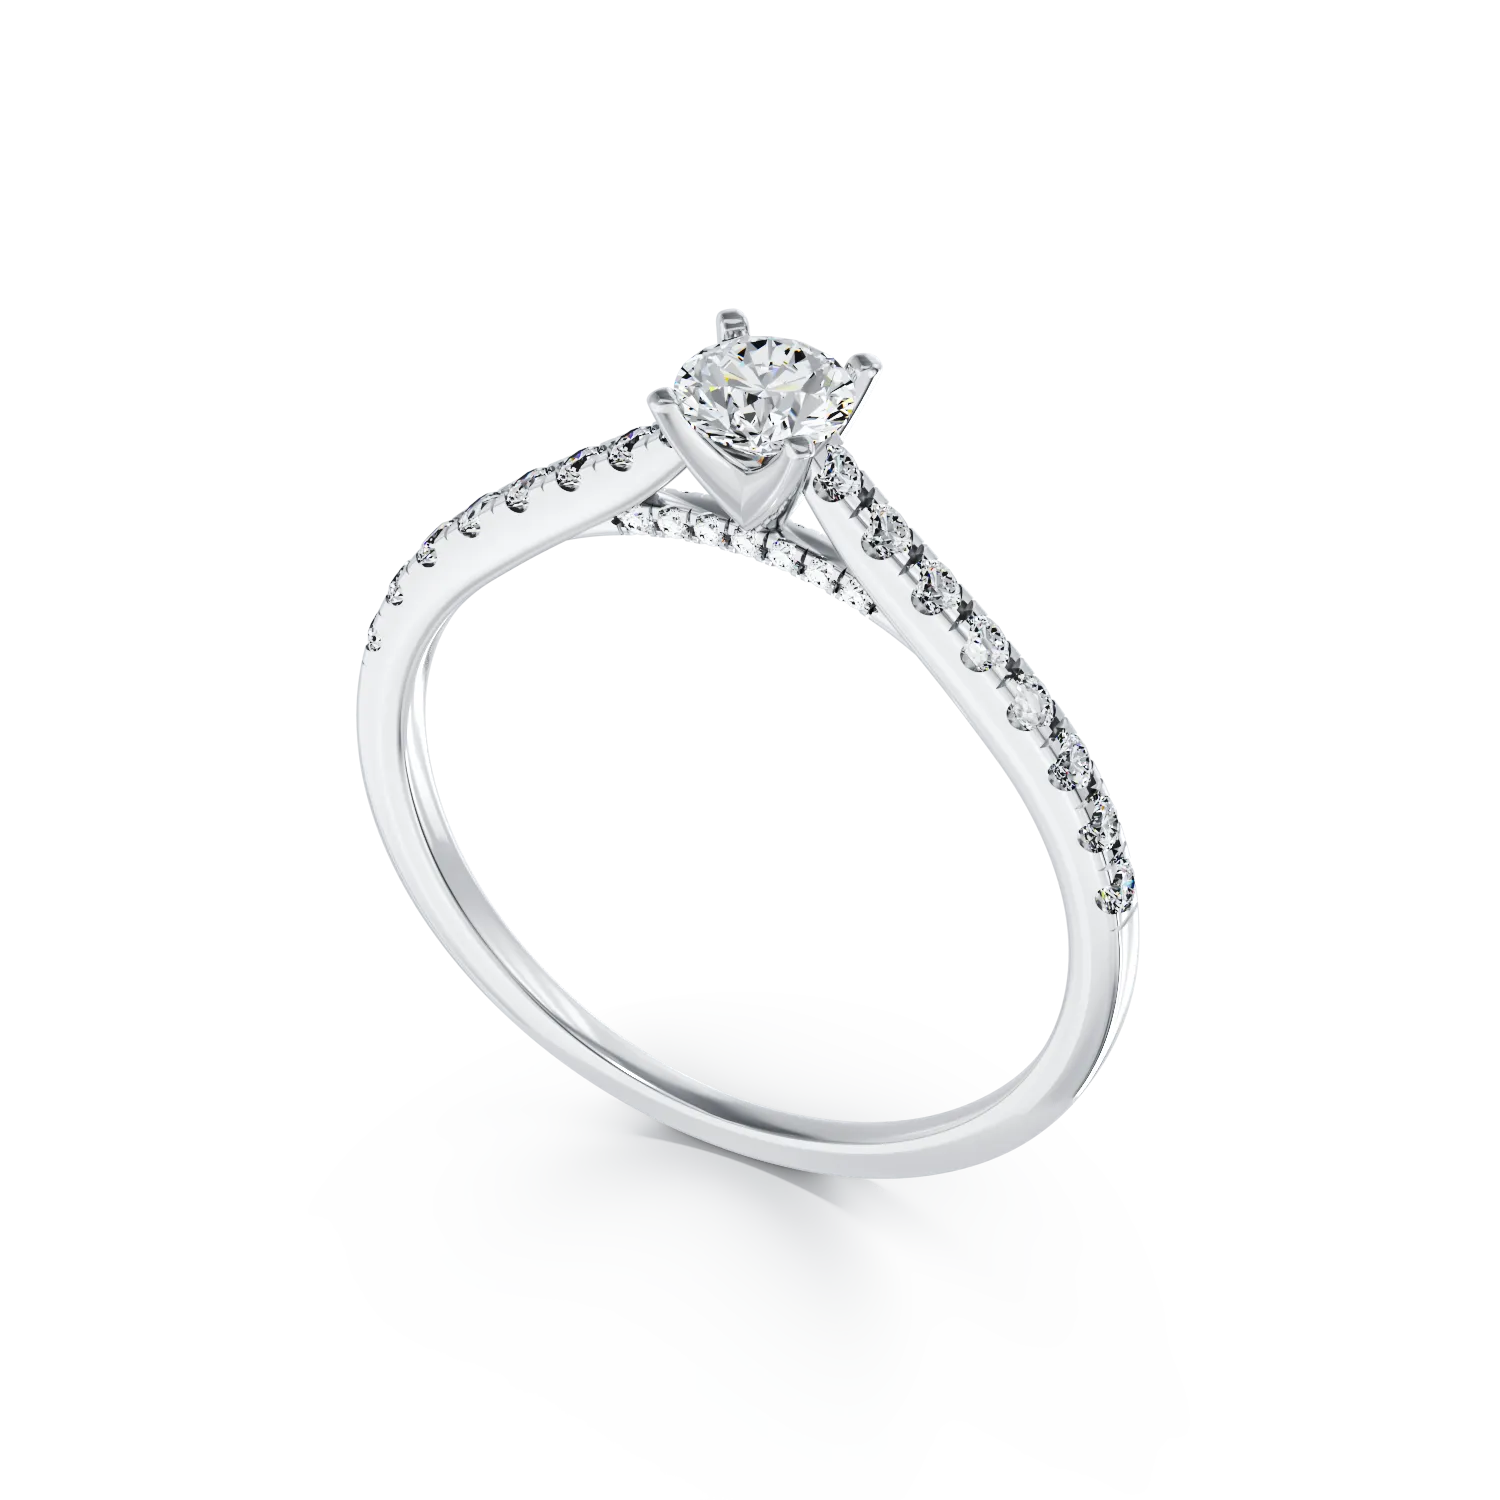 18K white gold engagement ring with 0.39ct diamond and 0.26ct diamonds